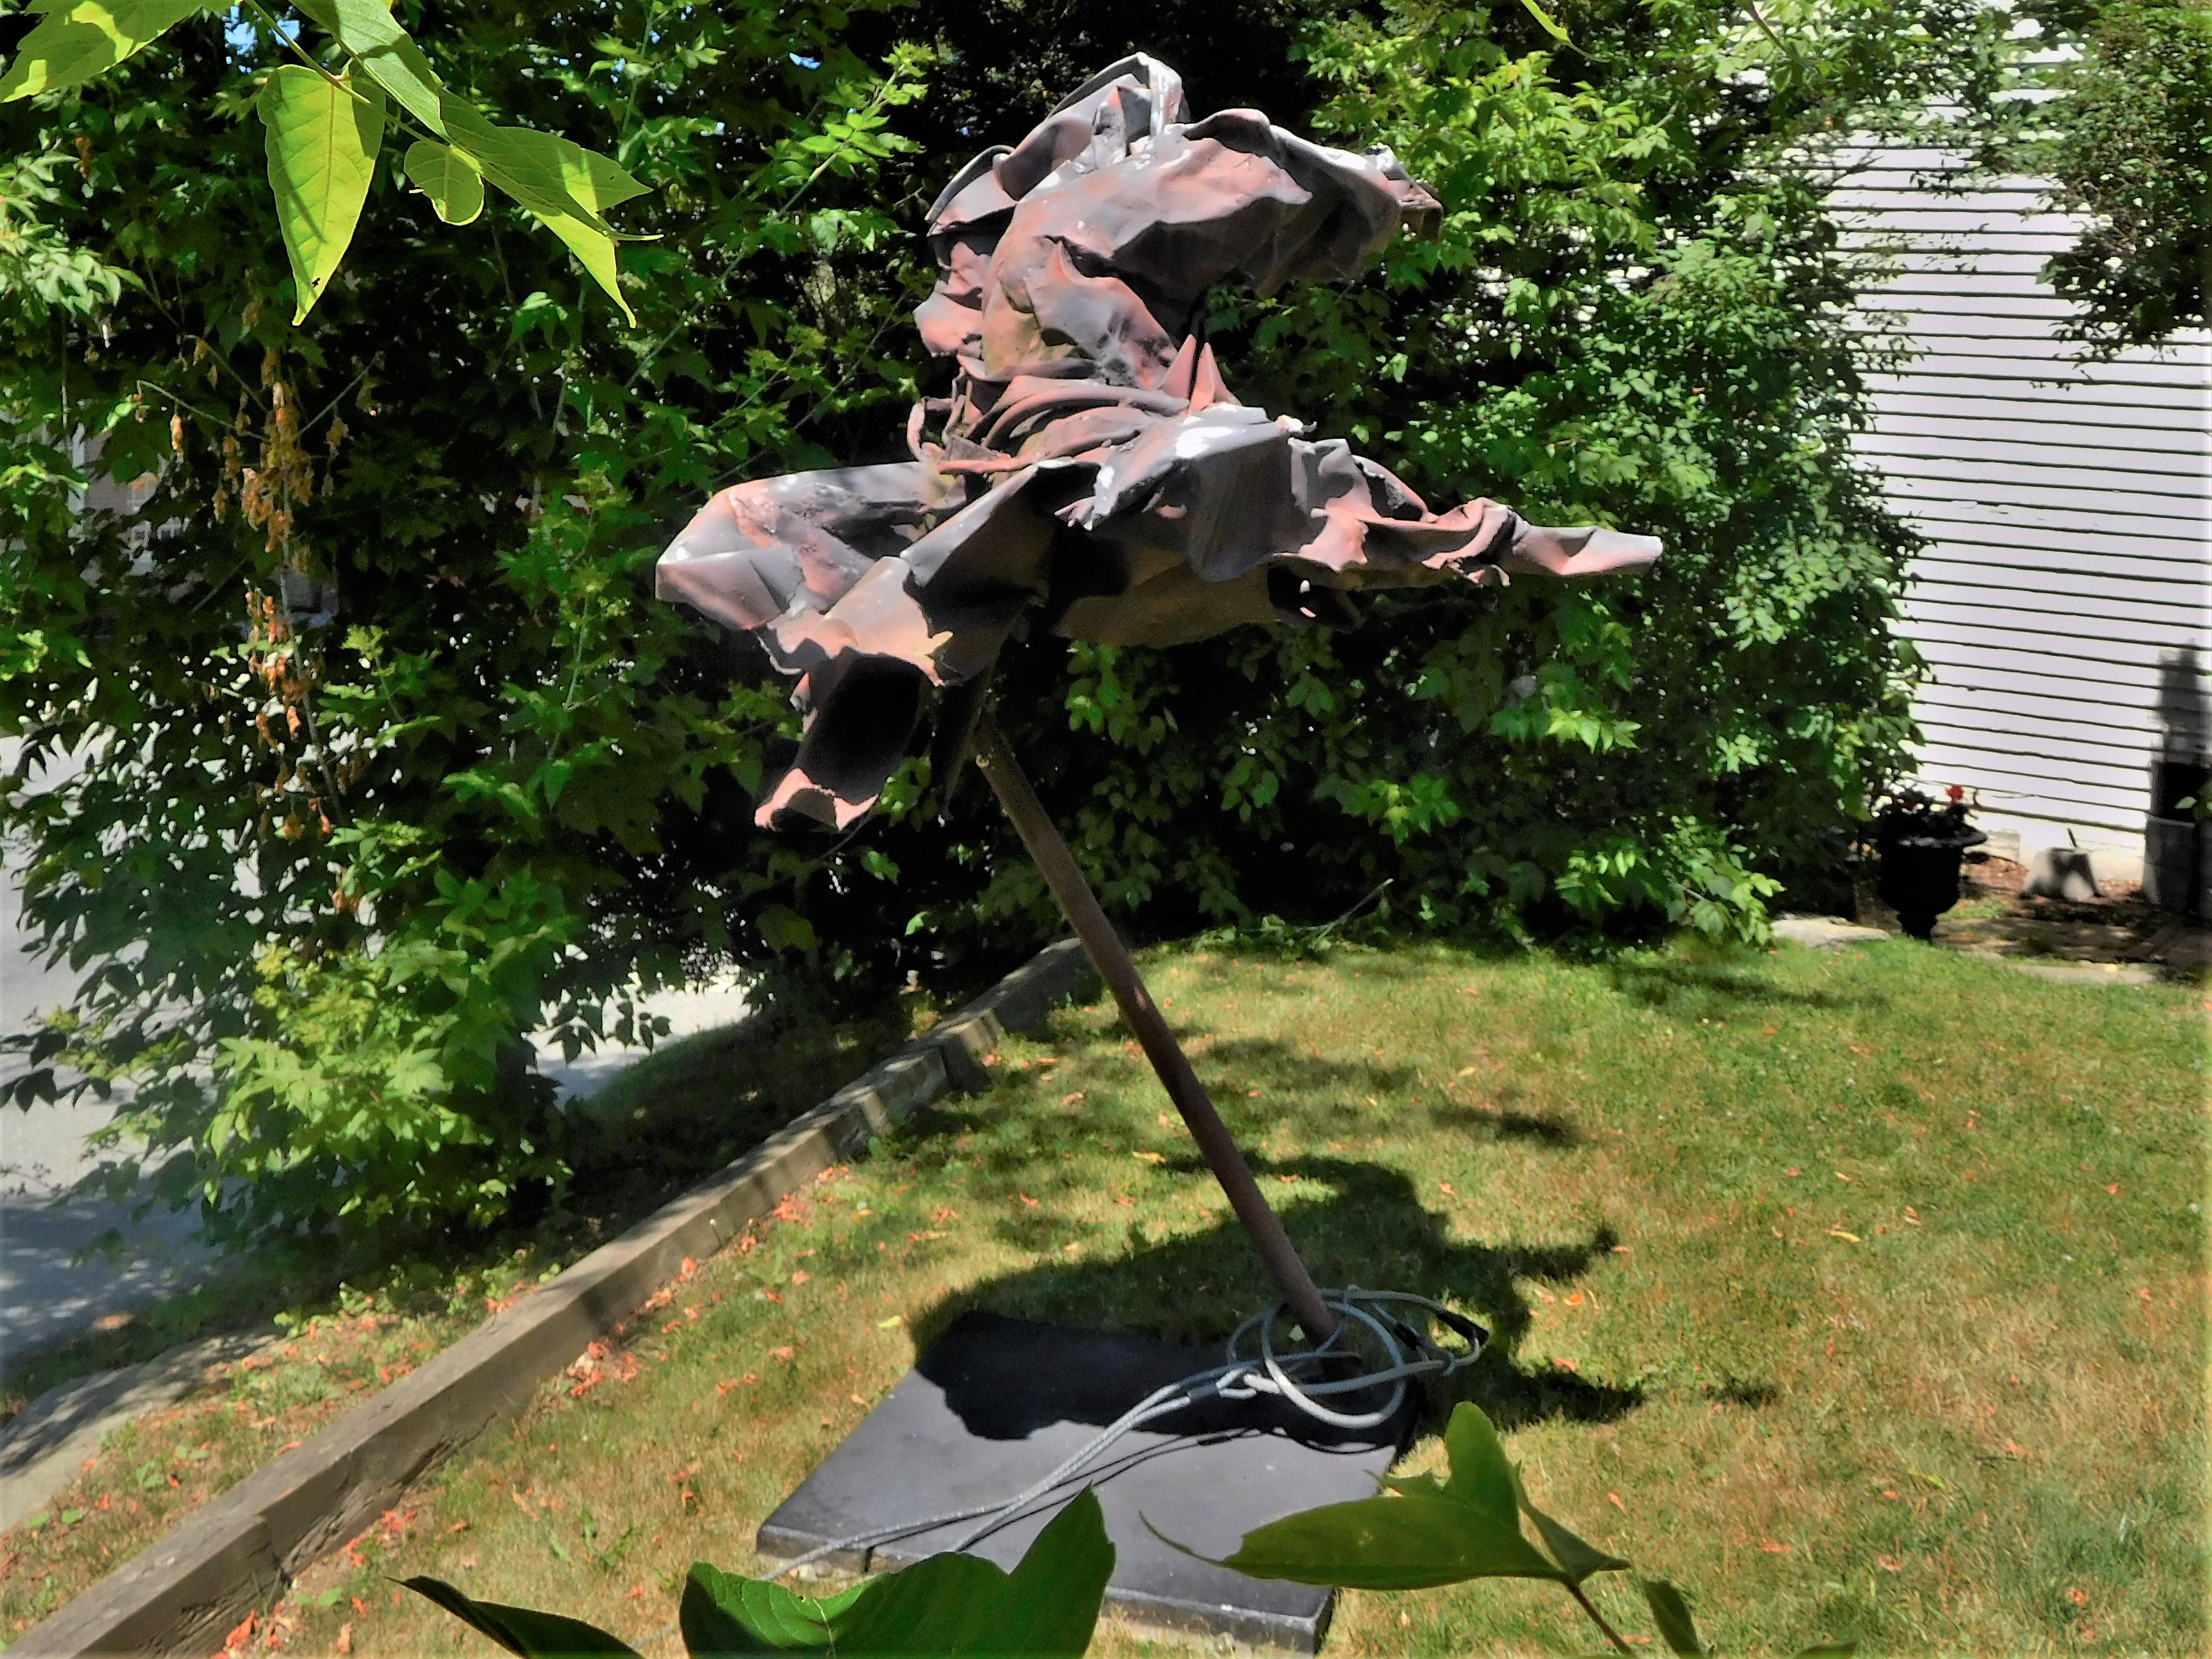 Judith Brown (1931-1992), dancer and multifaceted artist and sculptor, who had studios in New York City and Reading, Vermont, created this monumental sculpture from junked and crushed automobile parts. It is a Postmodern Expressionist figure from a